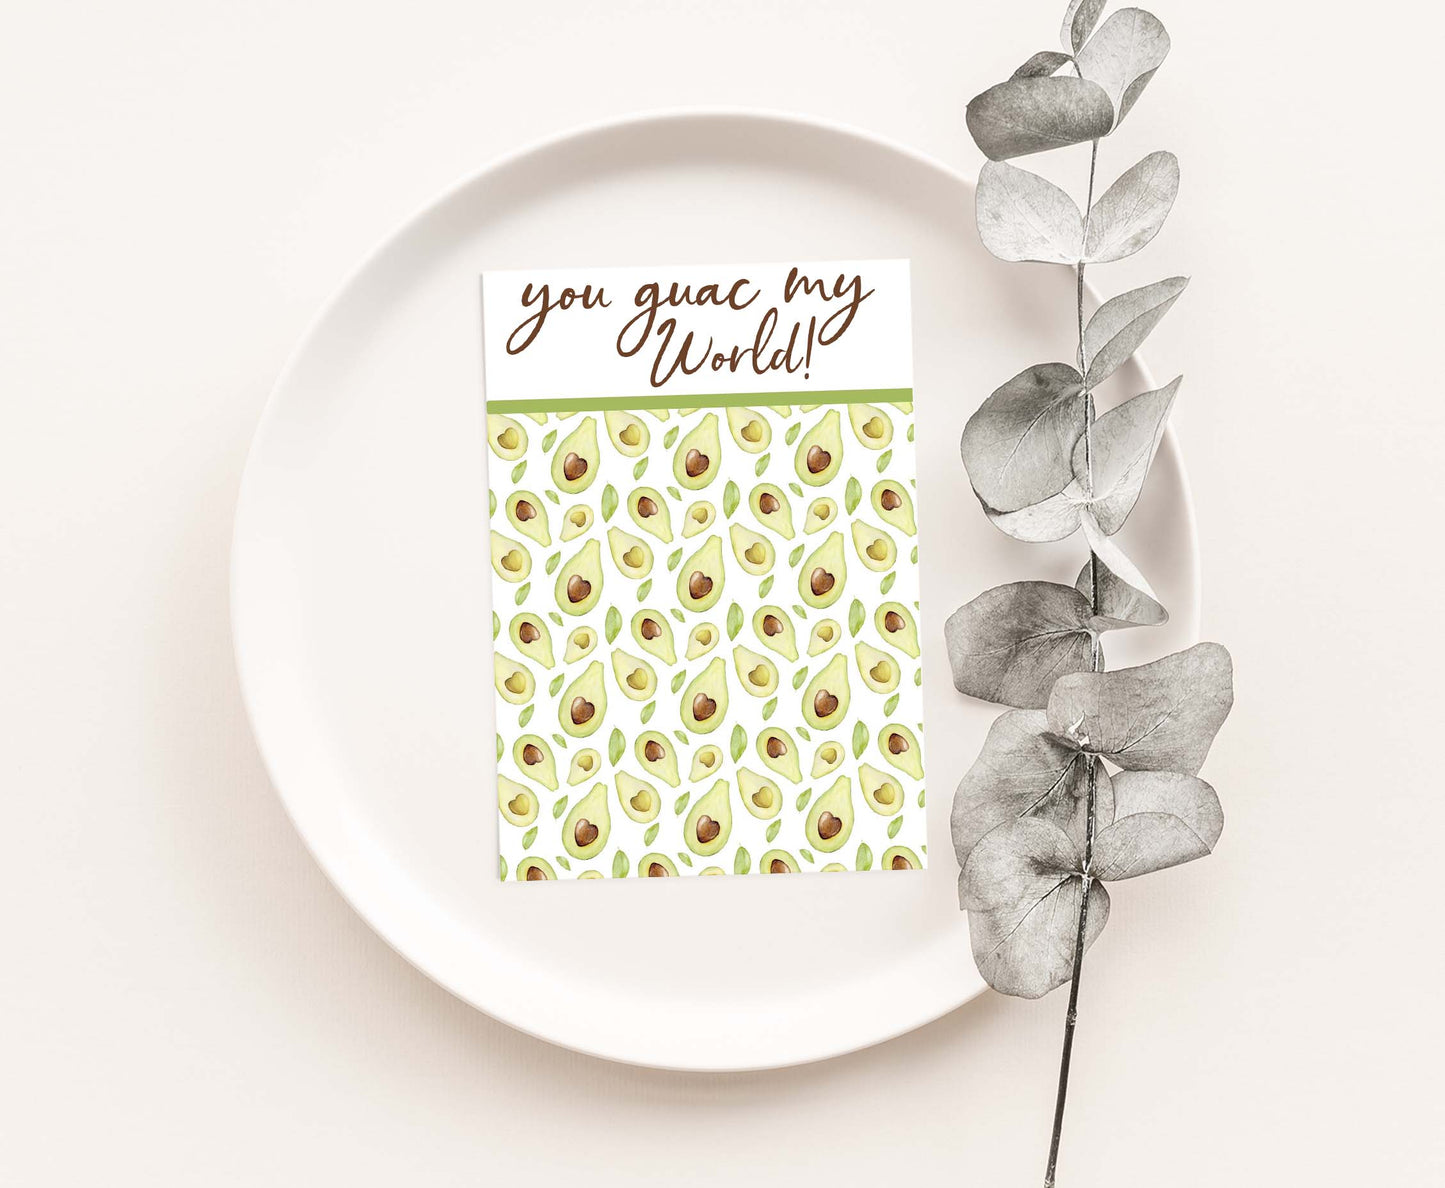 You Guac my World Cookie Card | Valentines Printable Cards - 119